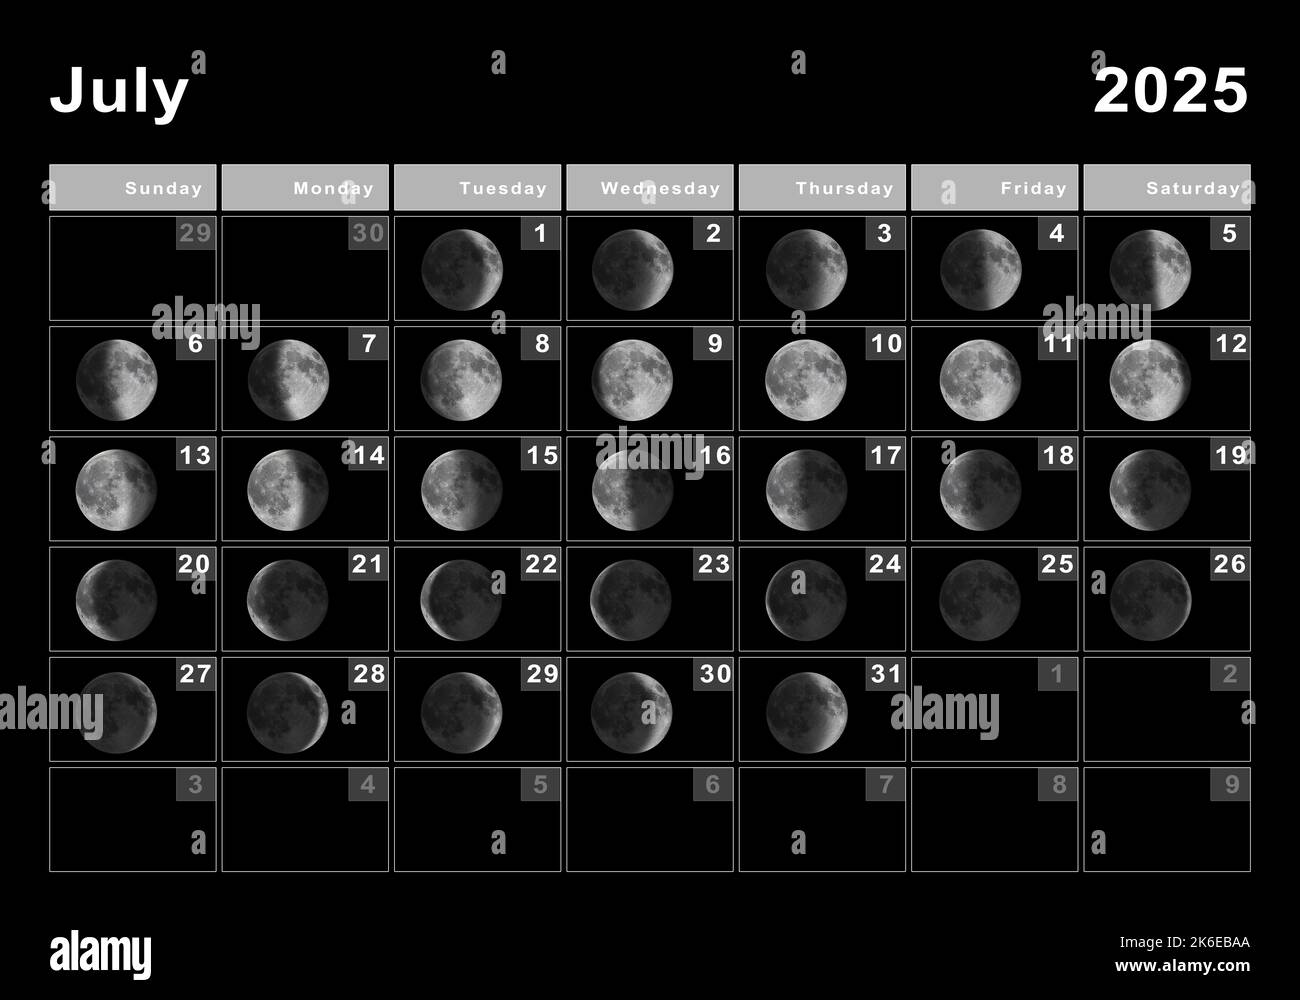 july-2025-lunar-calendar-moon-cycles-moon-phases-stock-photo-alamy